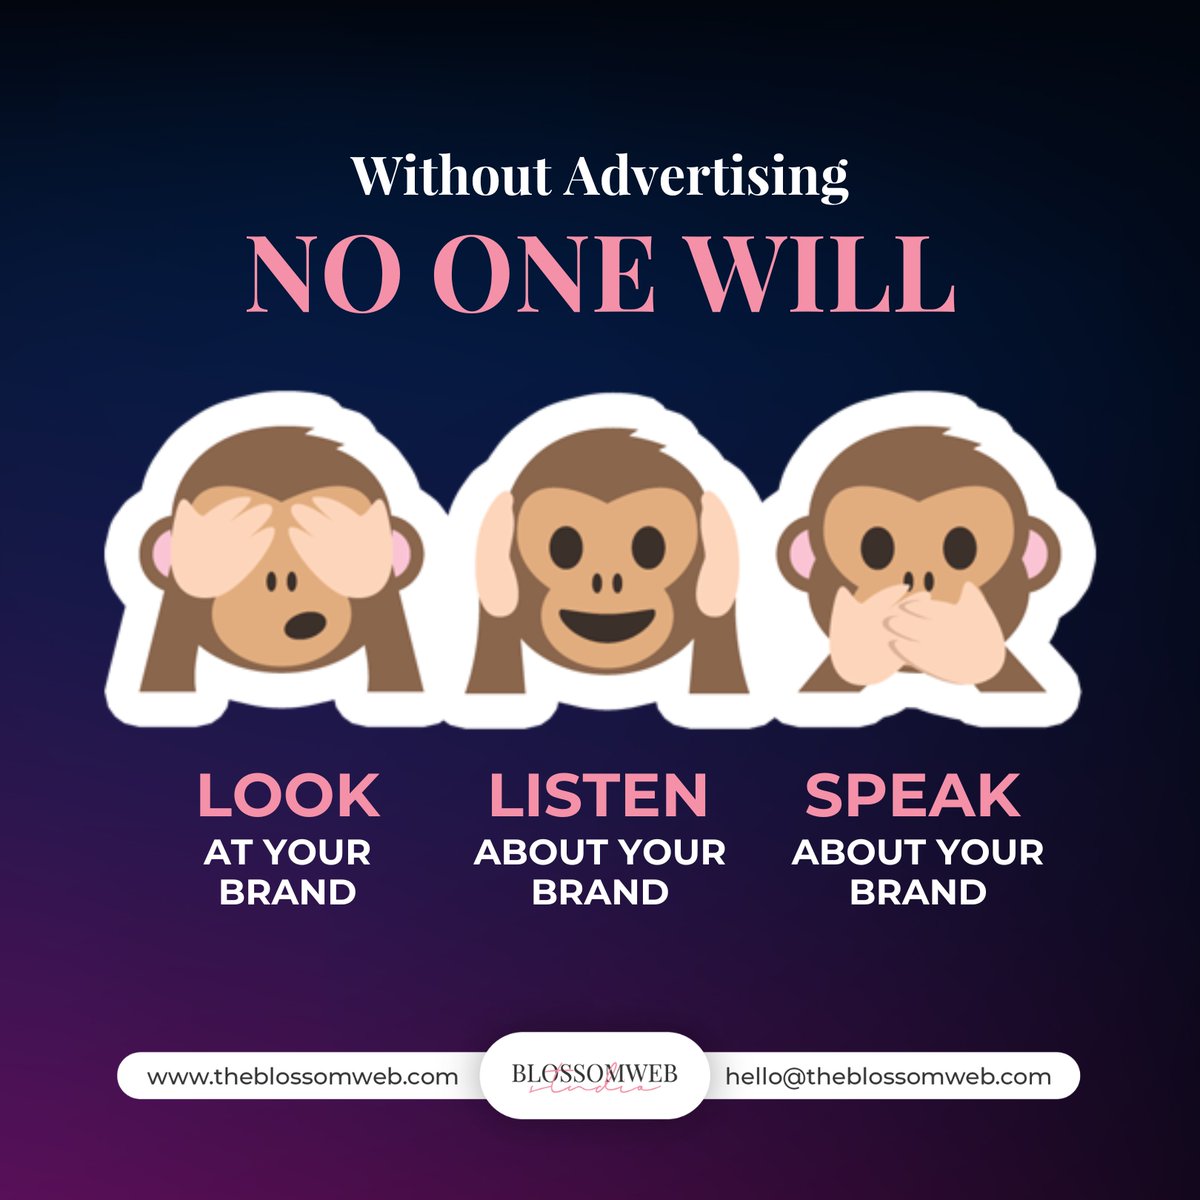 Without advertising, no one will discover your brilliance. Don't underestimate the power of promotion!

#advertisingworks #marketingmagic #promoteyourpassion #getnoticed #brandboost #visibilityiskey #growyouraudience #digitalmarketing #smallbizsuccess #blossomwebstudio